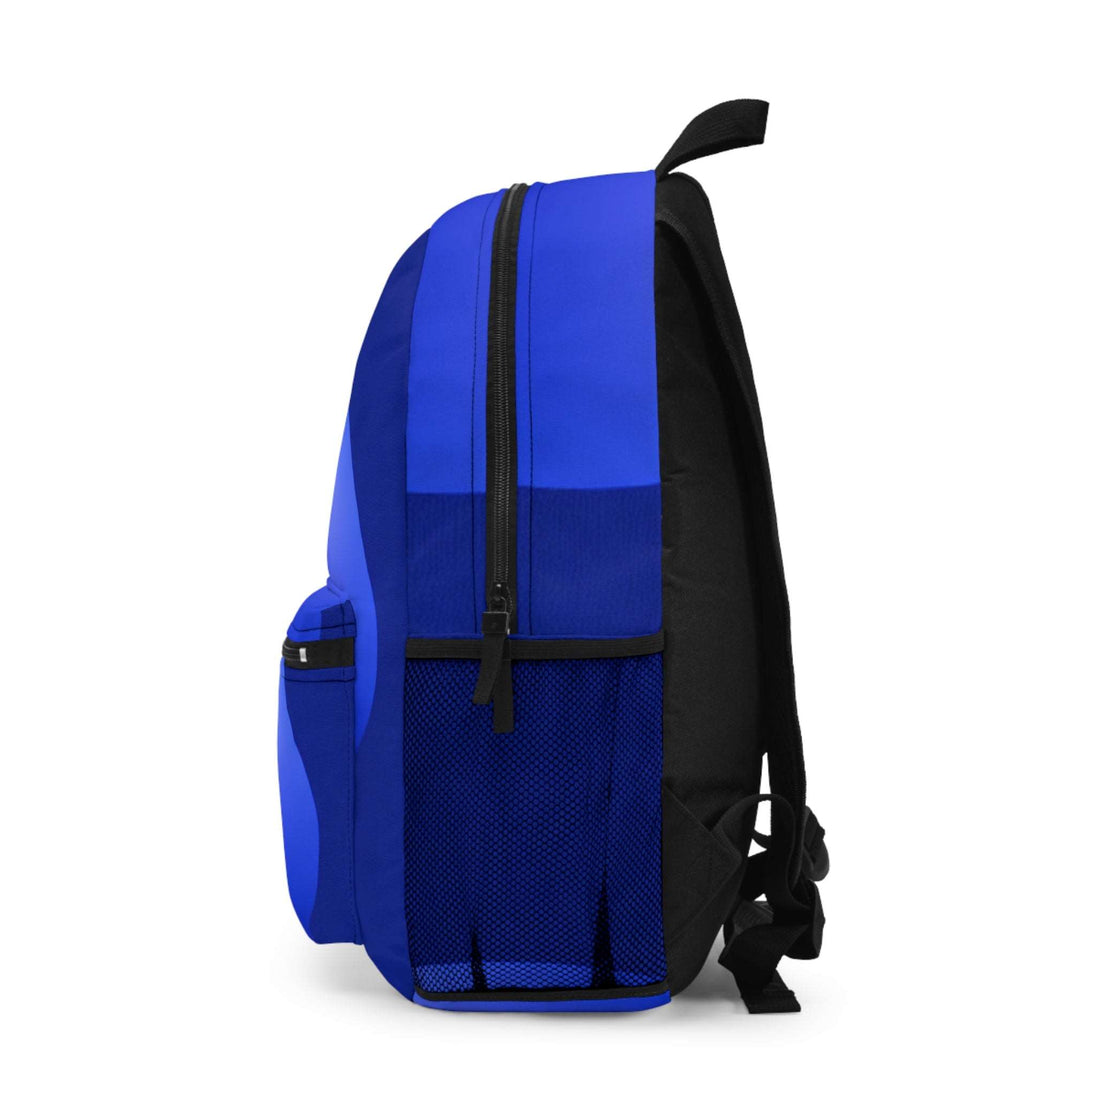 ''Step out in elegant simplicity with our Solid Color Backpacks. Say goodbye to complex, overly design-oriented backpacks, and say hello to pure, untainted monotone beauty. These backpacks, designed with a touch of modern minimalism in mind - Backpack